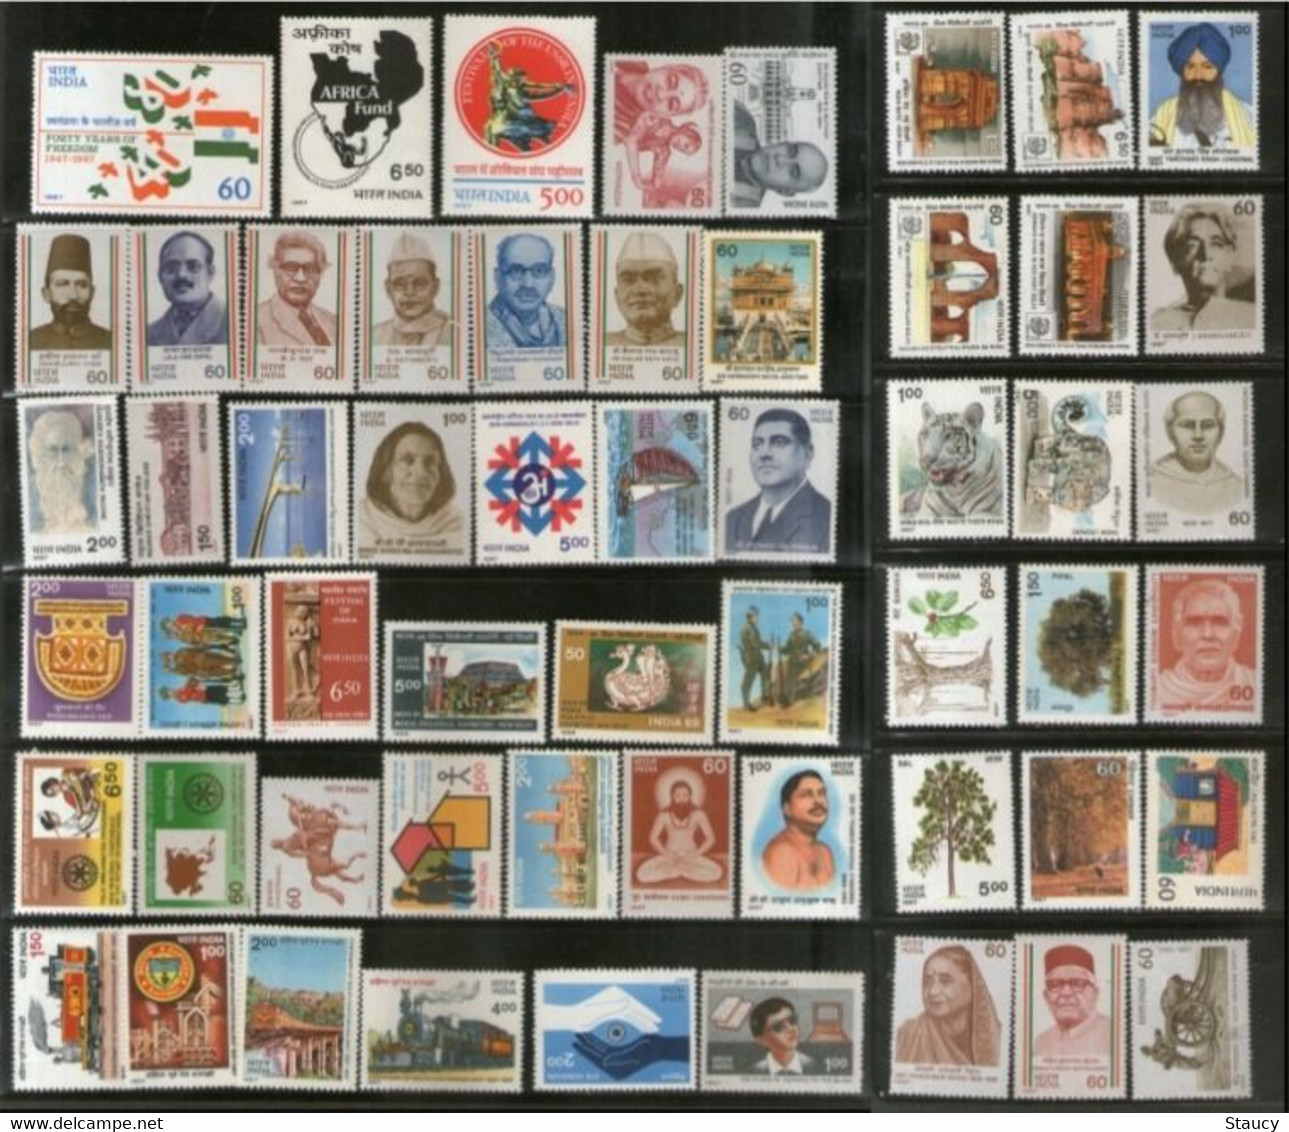 India 1987 Complete Year Pack / Set / Collection Total 56 Stamps (No Missing) MNH As Per Scan - Années Complètes